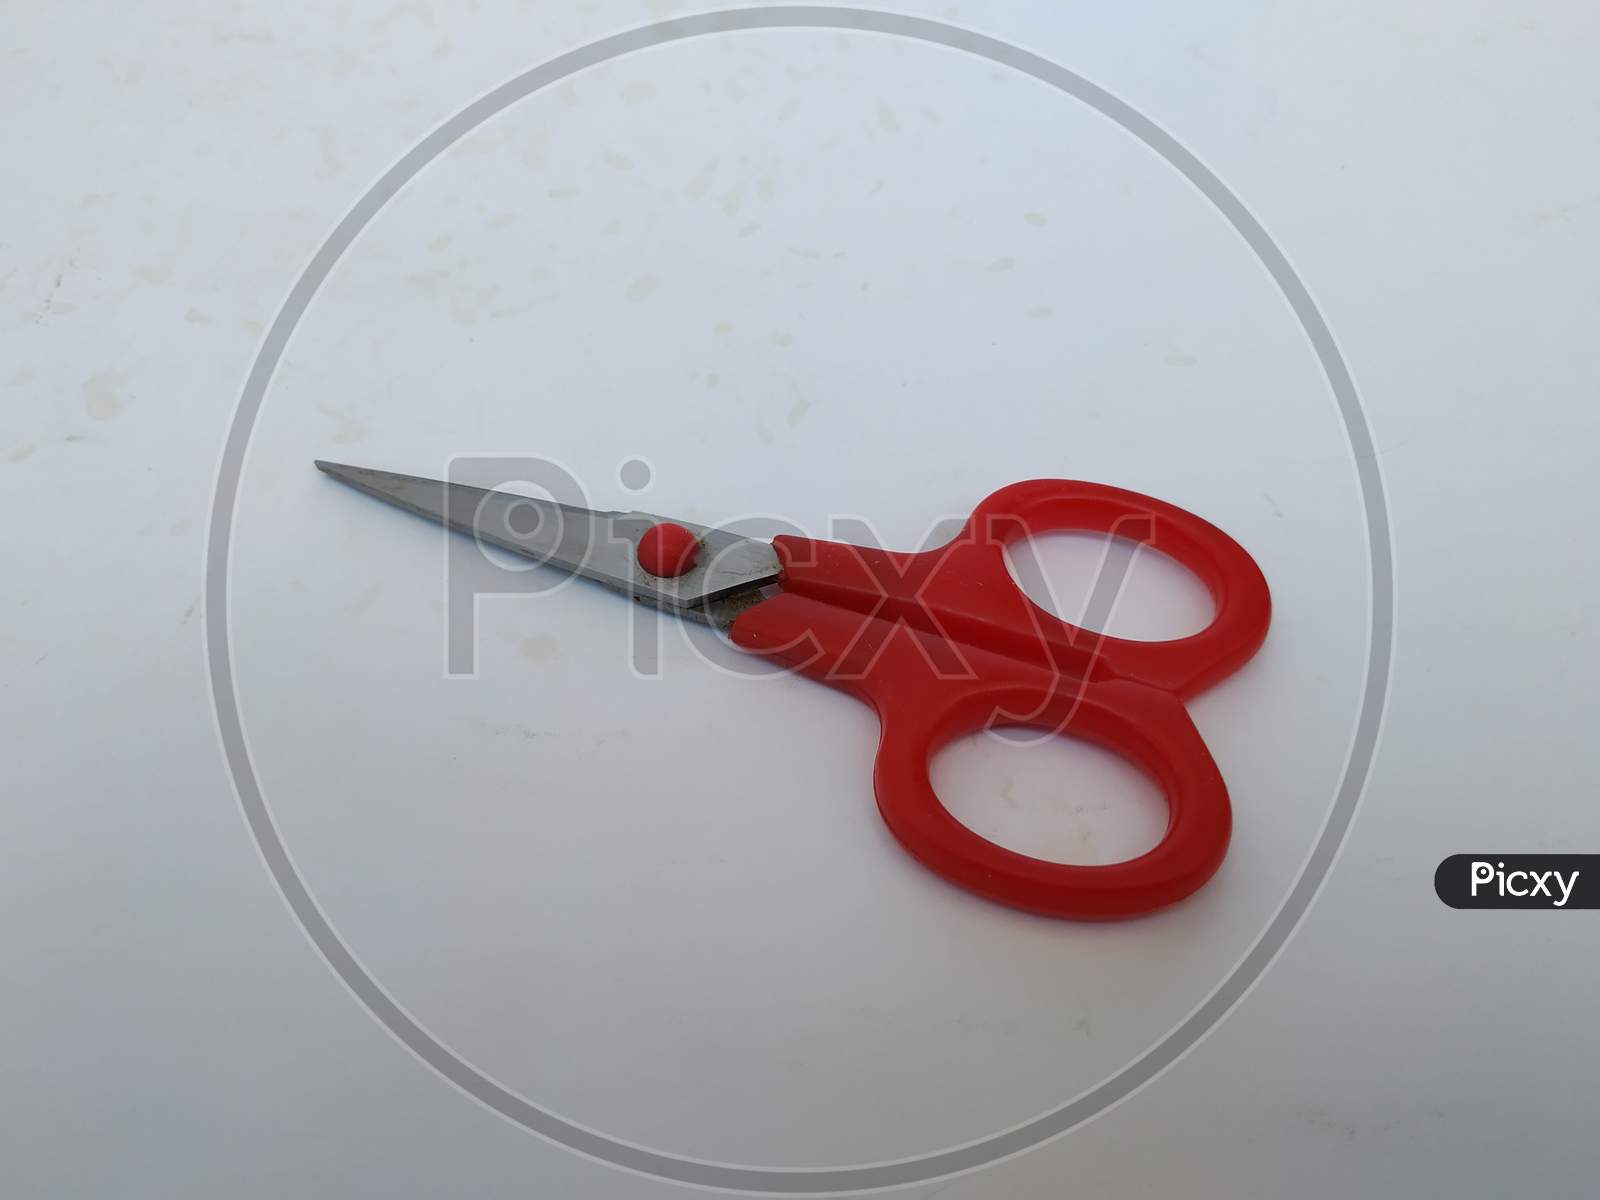 Steel and Red Color Small Single Scissor isolated on white Background